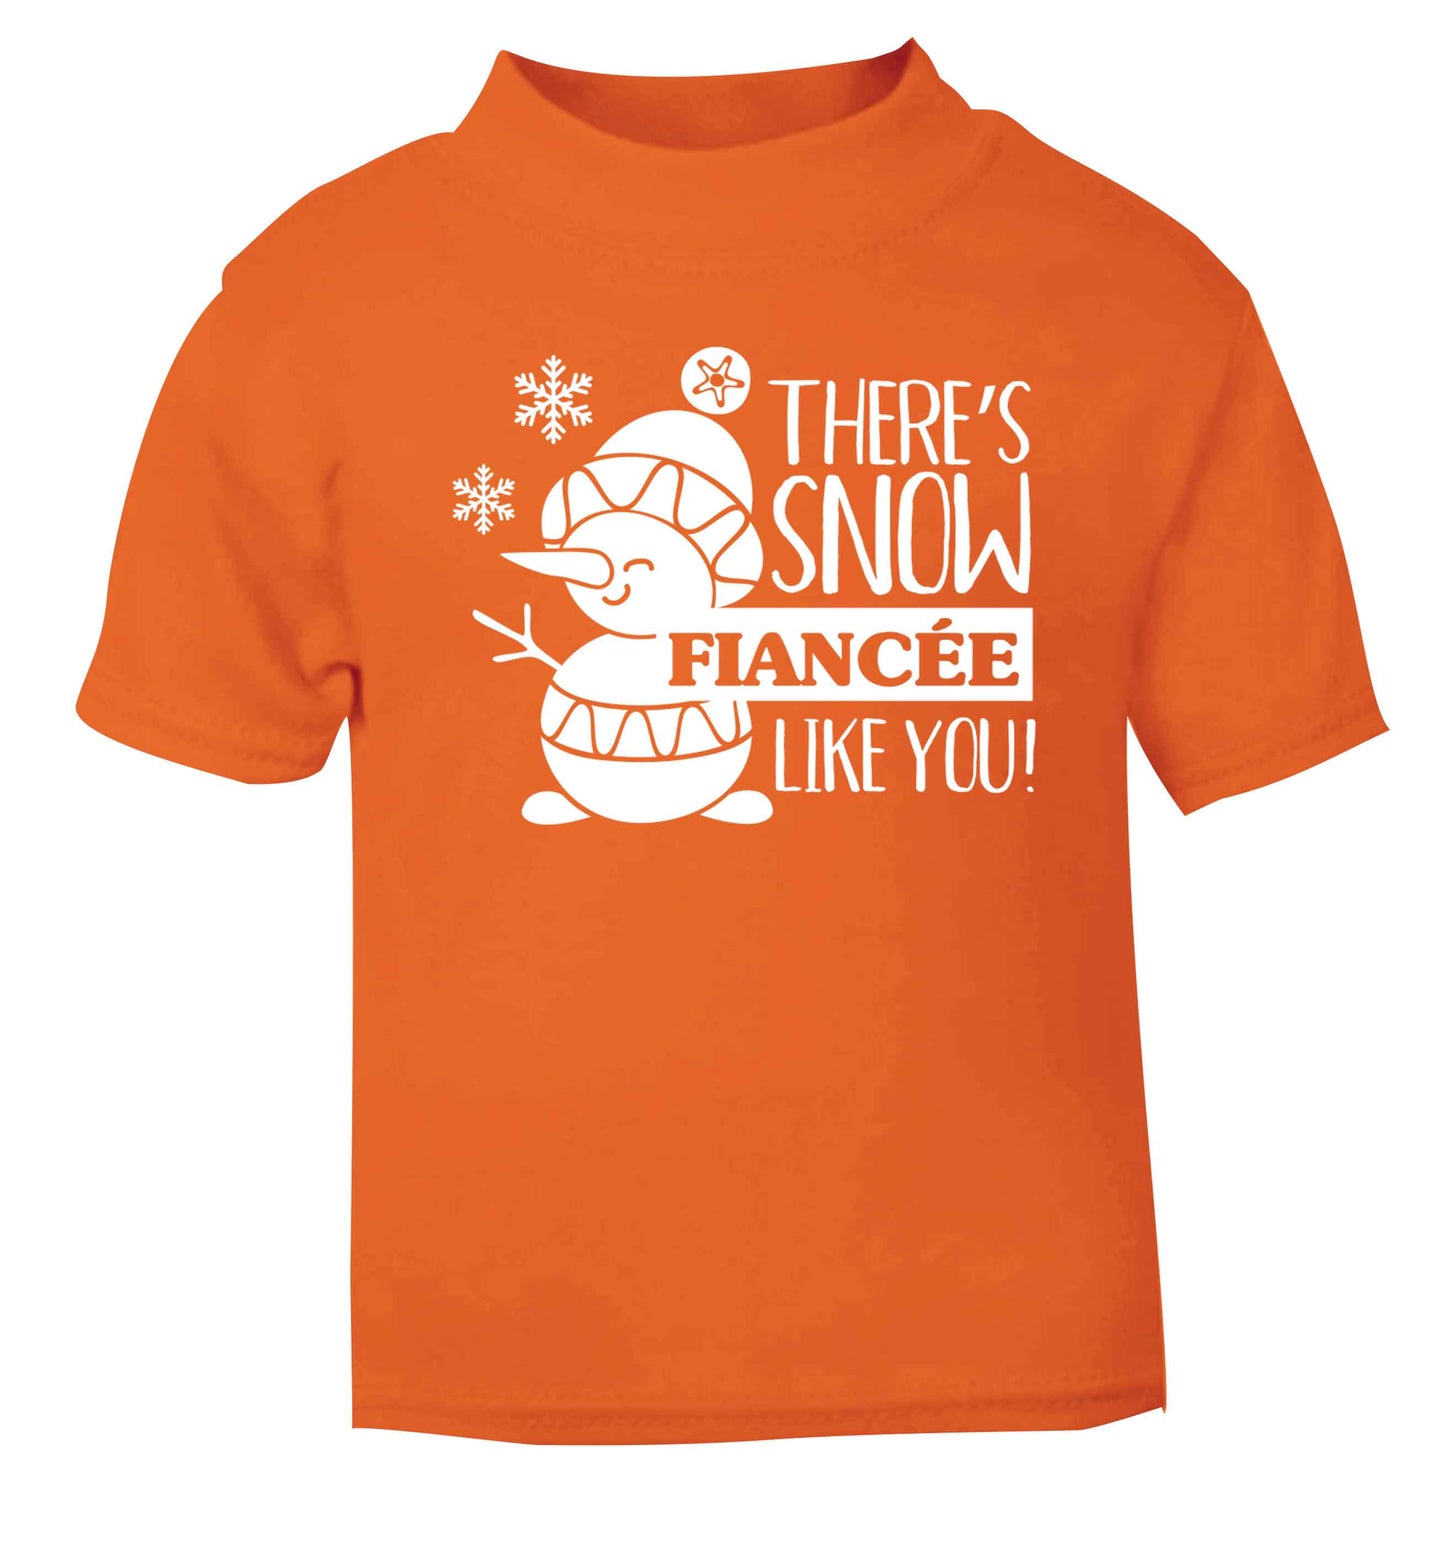 There's snow fiancee like you orange baby toddler Tshirt 2 Years